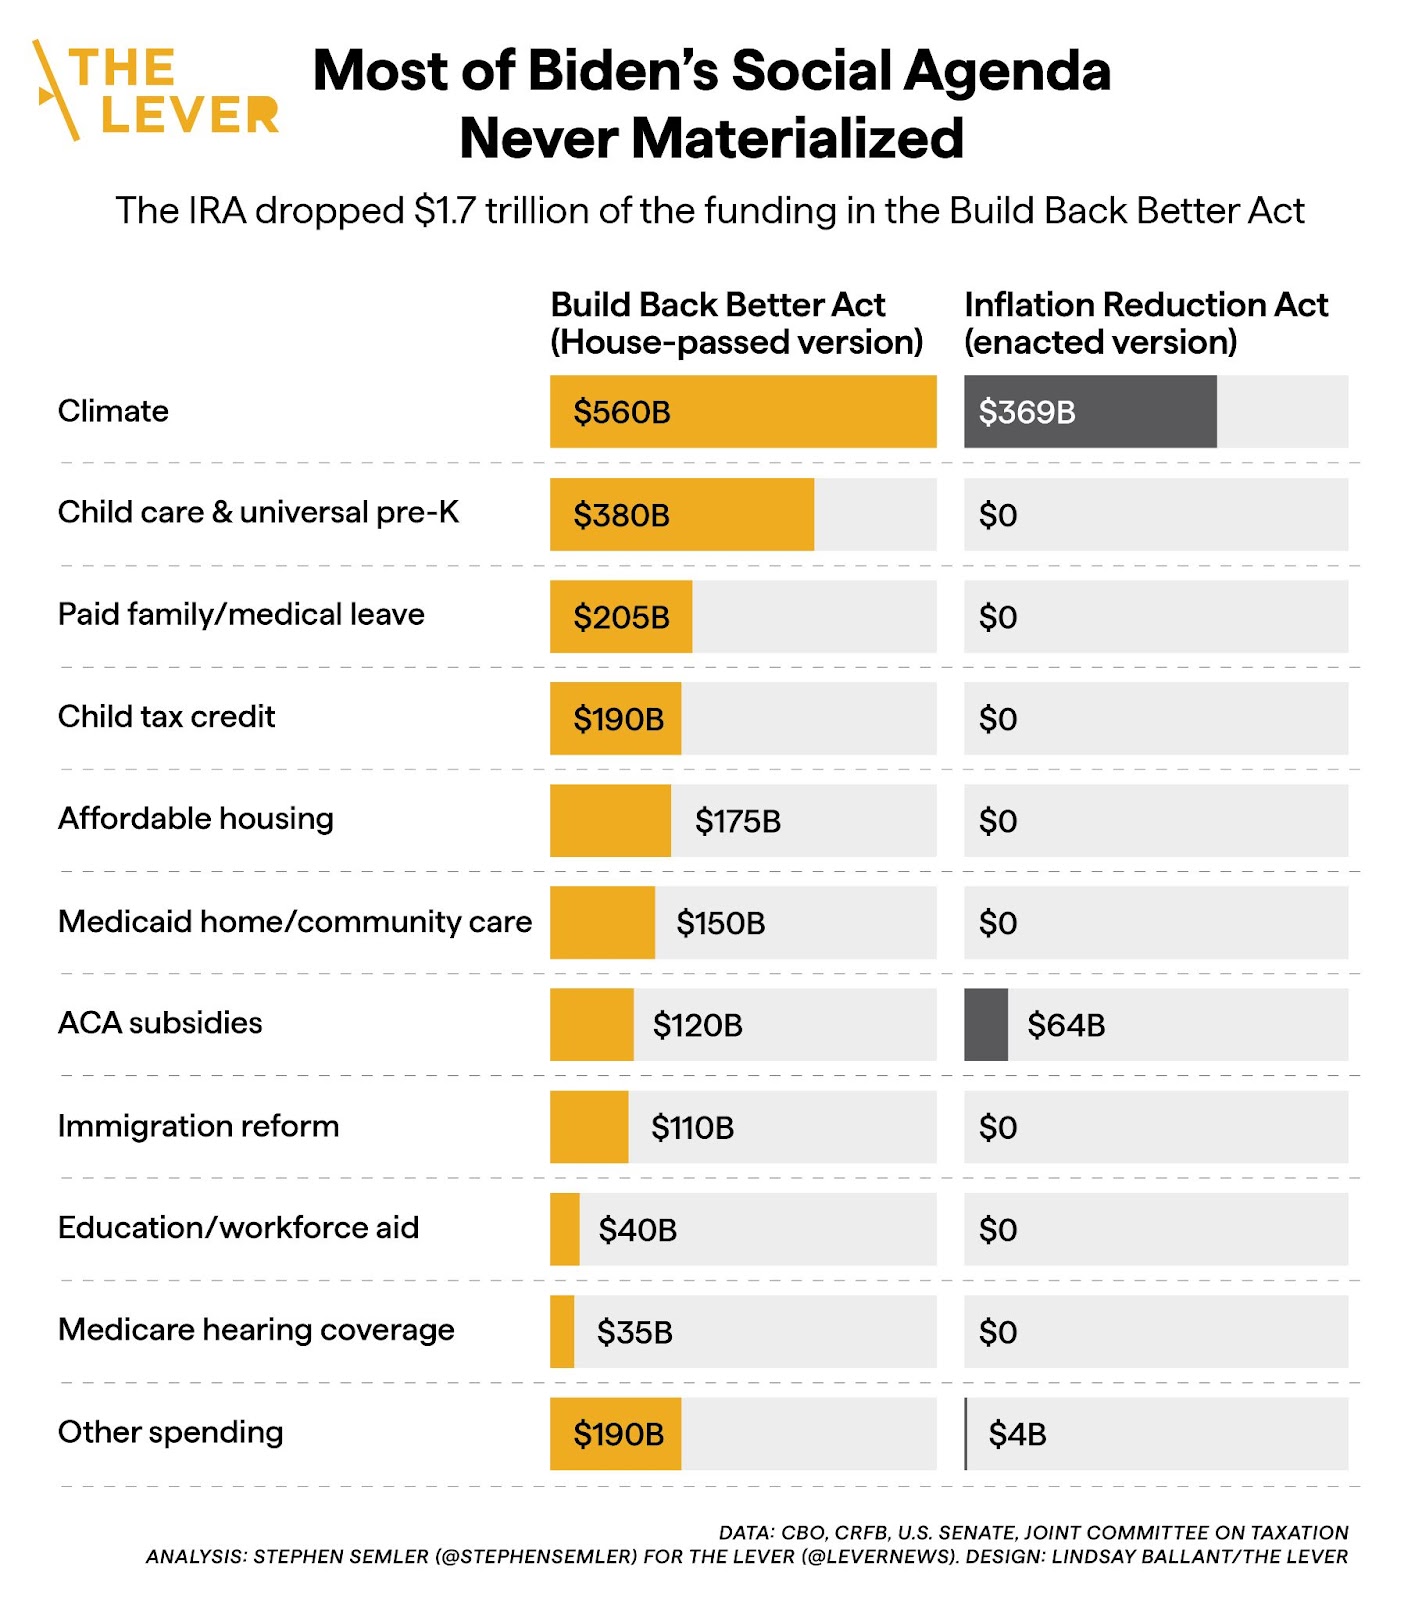 Most of Biden’s social agenda never materialized. The IRA dropped $1.7 trillion of the funding in the Build Back Better Act. This chart has two columns comparing the House-passed reconciliation bill, the Build Back Better Act, and the final version, the Inflation Reduction Act. The following figures are in billions: Climate funding, $560 to $369; child care & universal pre-K, $380 to $0; paid family & medical leave, $205 to $0; child tax credit, $190 to $0; affordable housing, $175 to $0; Medicaid home & community care, $150 to $0; Affordable Care Act subsidies, $120 to $64; immigration reform, $110 to $0; education & workforce aid, $40 to $0; Medicare hearing coverage, $35 to $0; other spending, $190 to $4. Data comes from the CBO, CRFB, U.S. Senate, and the Joint Committee on Taxation. Read more at levernews.com. Chart and analysis by Stephen Semler (@stephensemler).